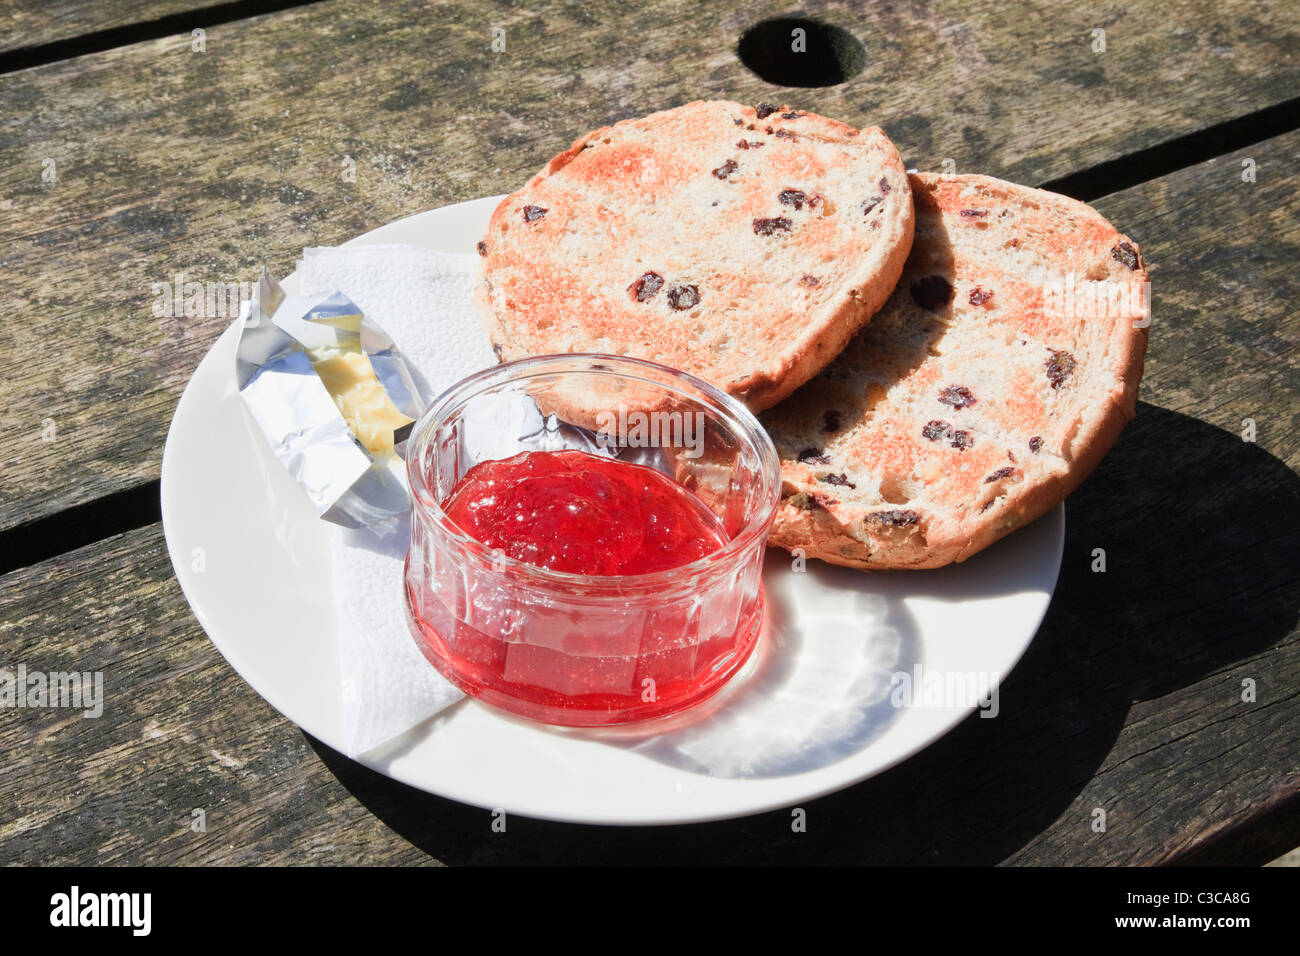 Toasted teacake on a plate with butter and a pot of jam on a rustic wooden table. England UK Britain Stock Photo